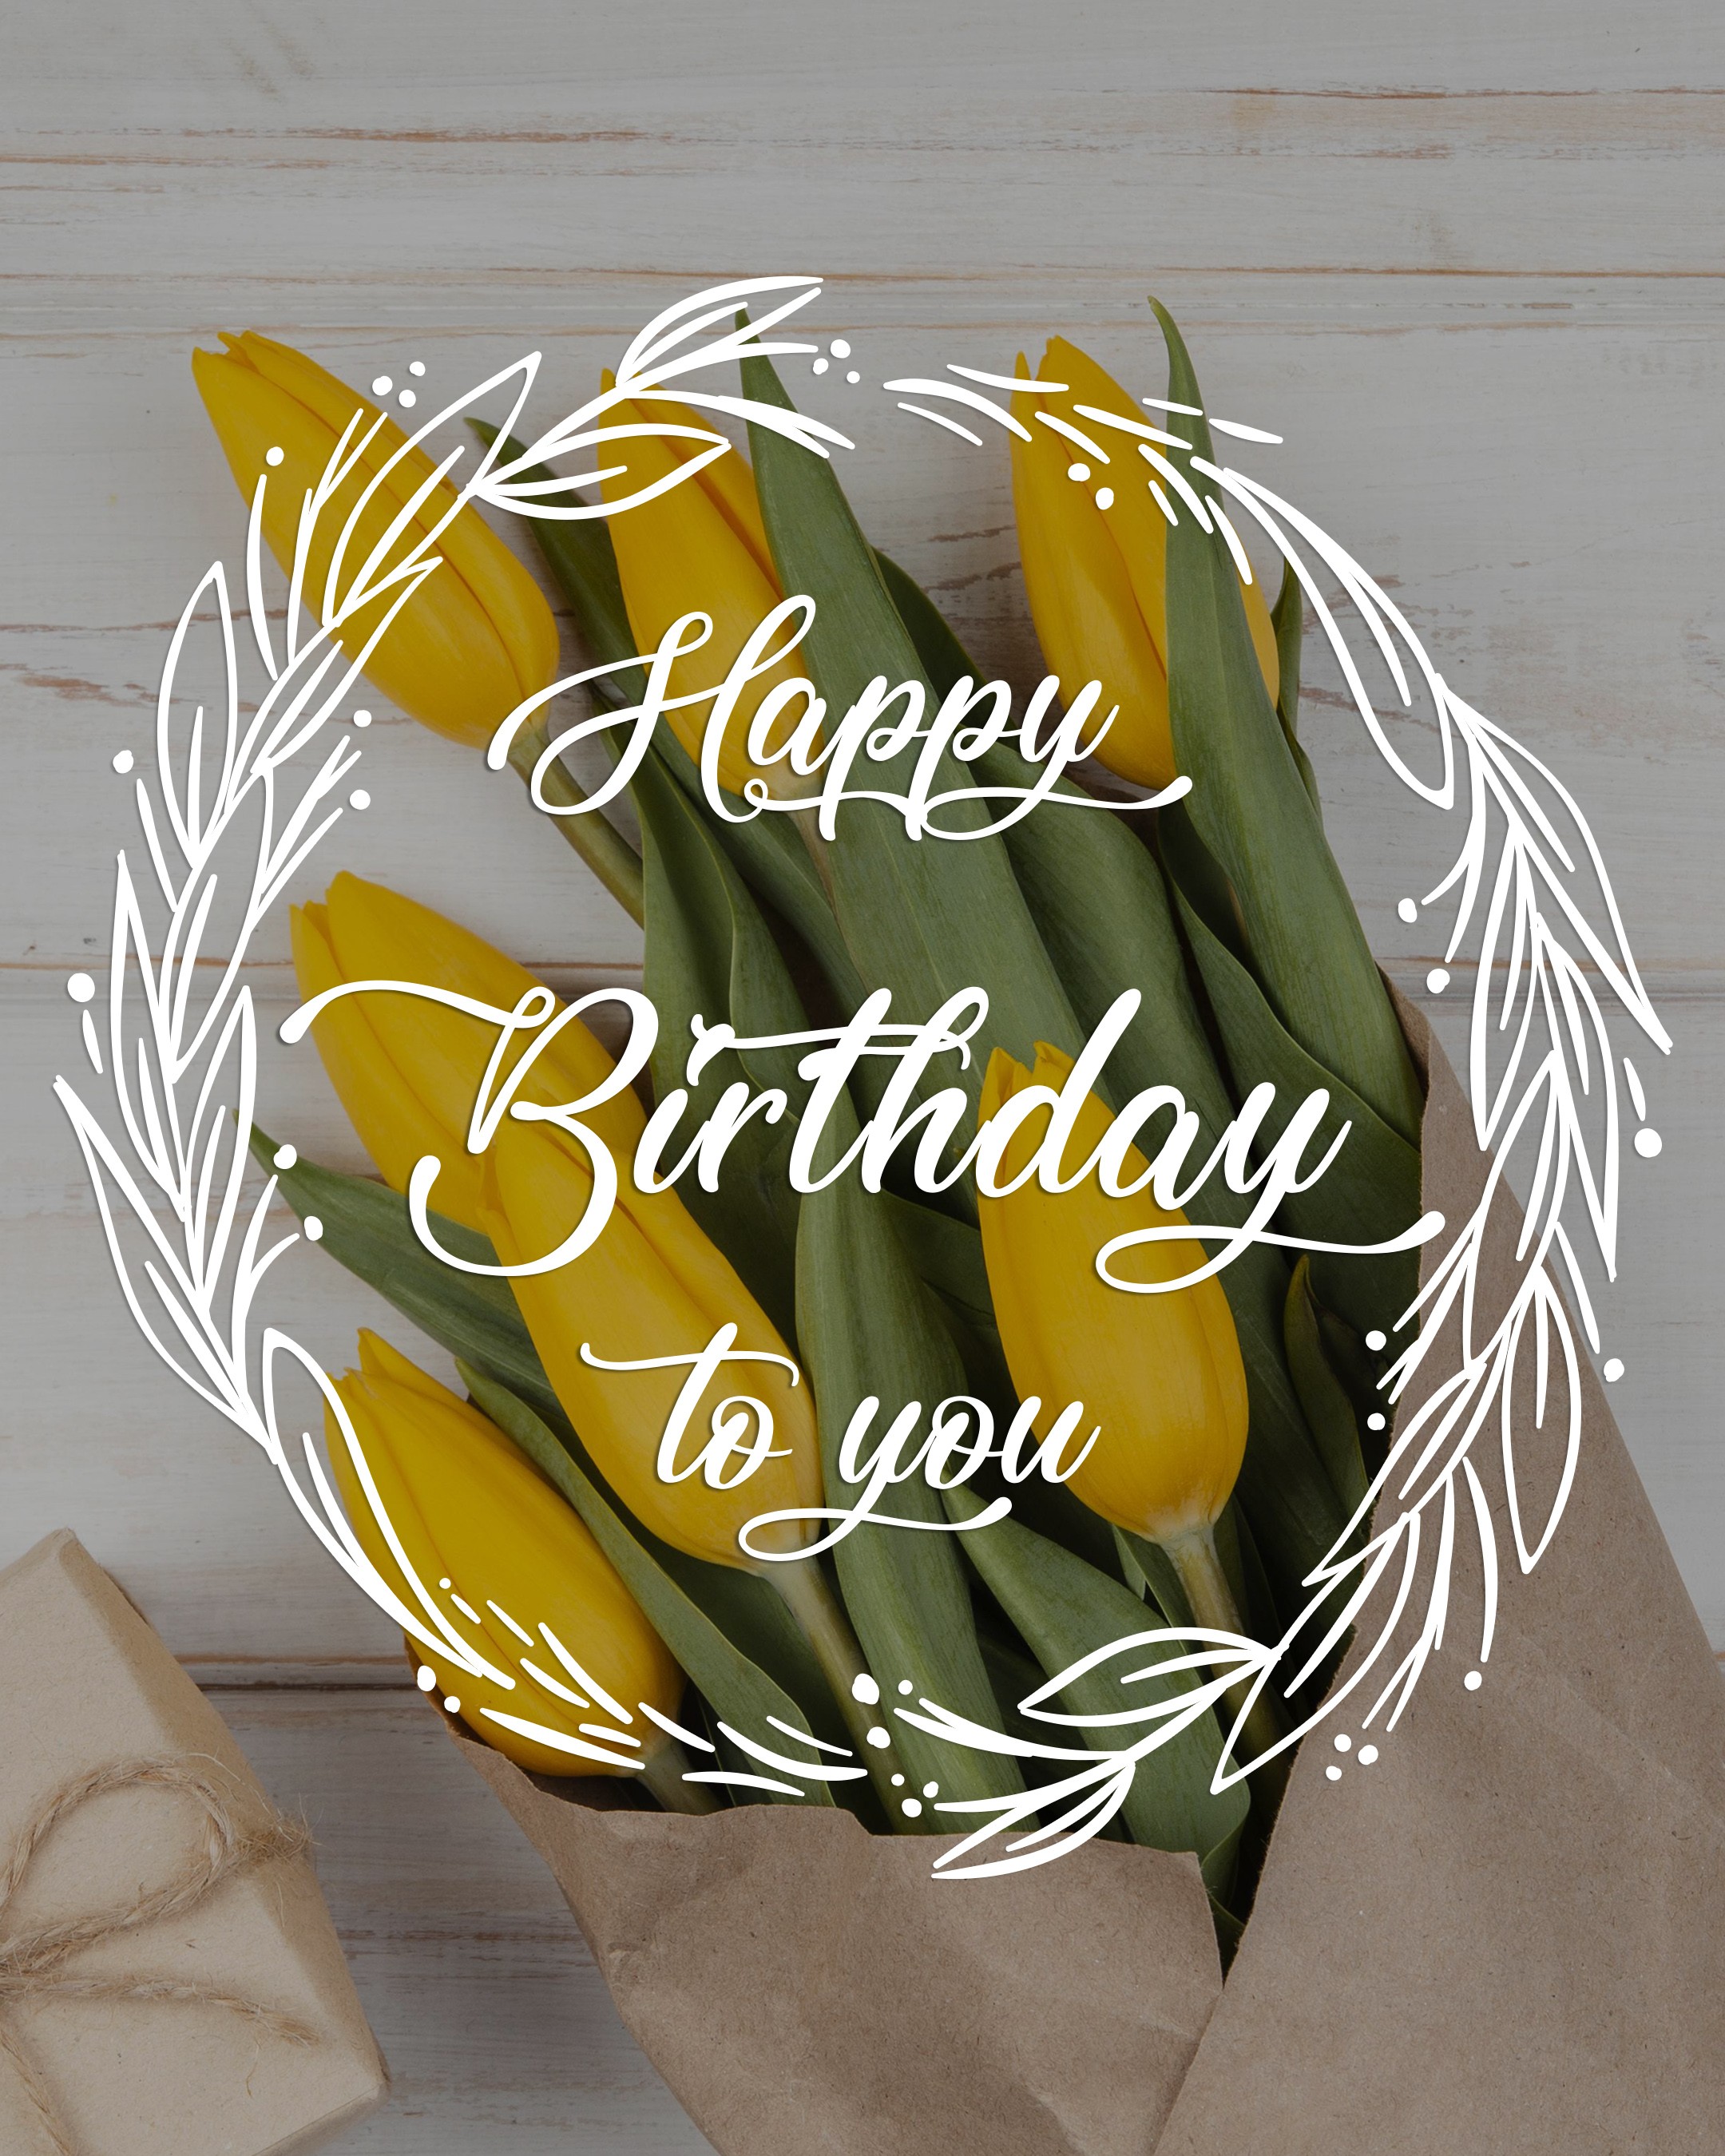 Free Happy Birthday Images For Her (Woman) With Yellow Flowers - birthdayimg.com